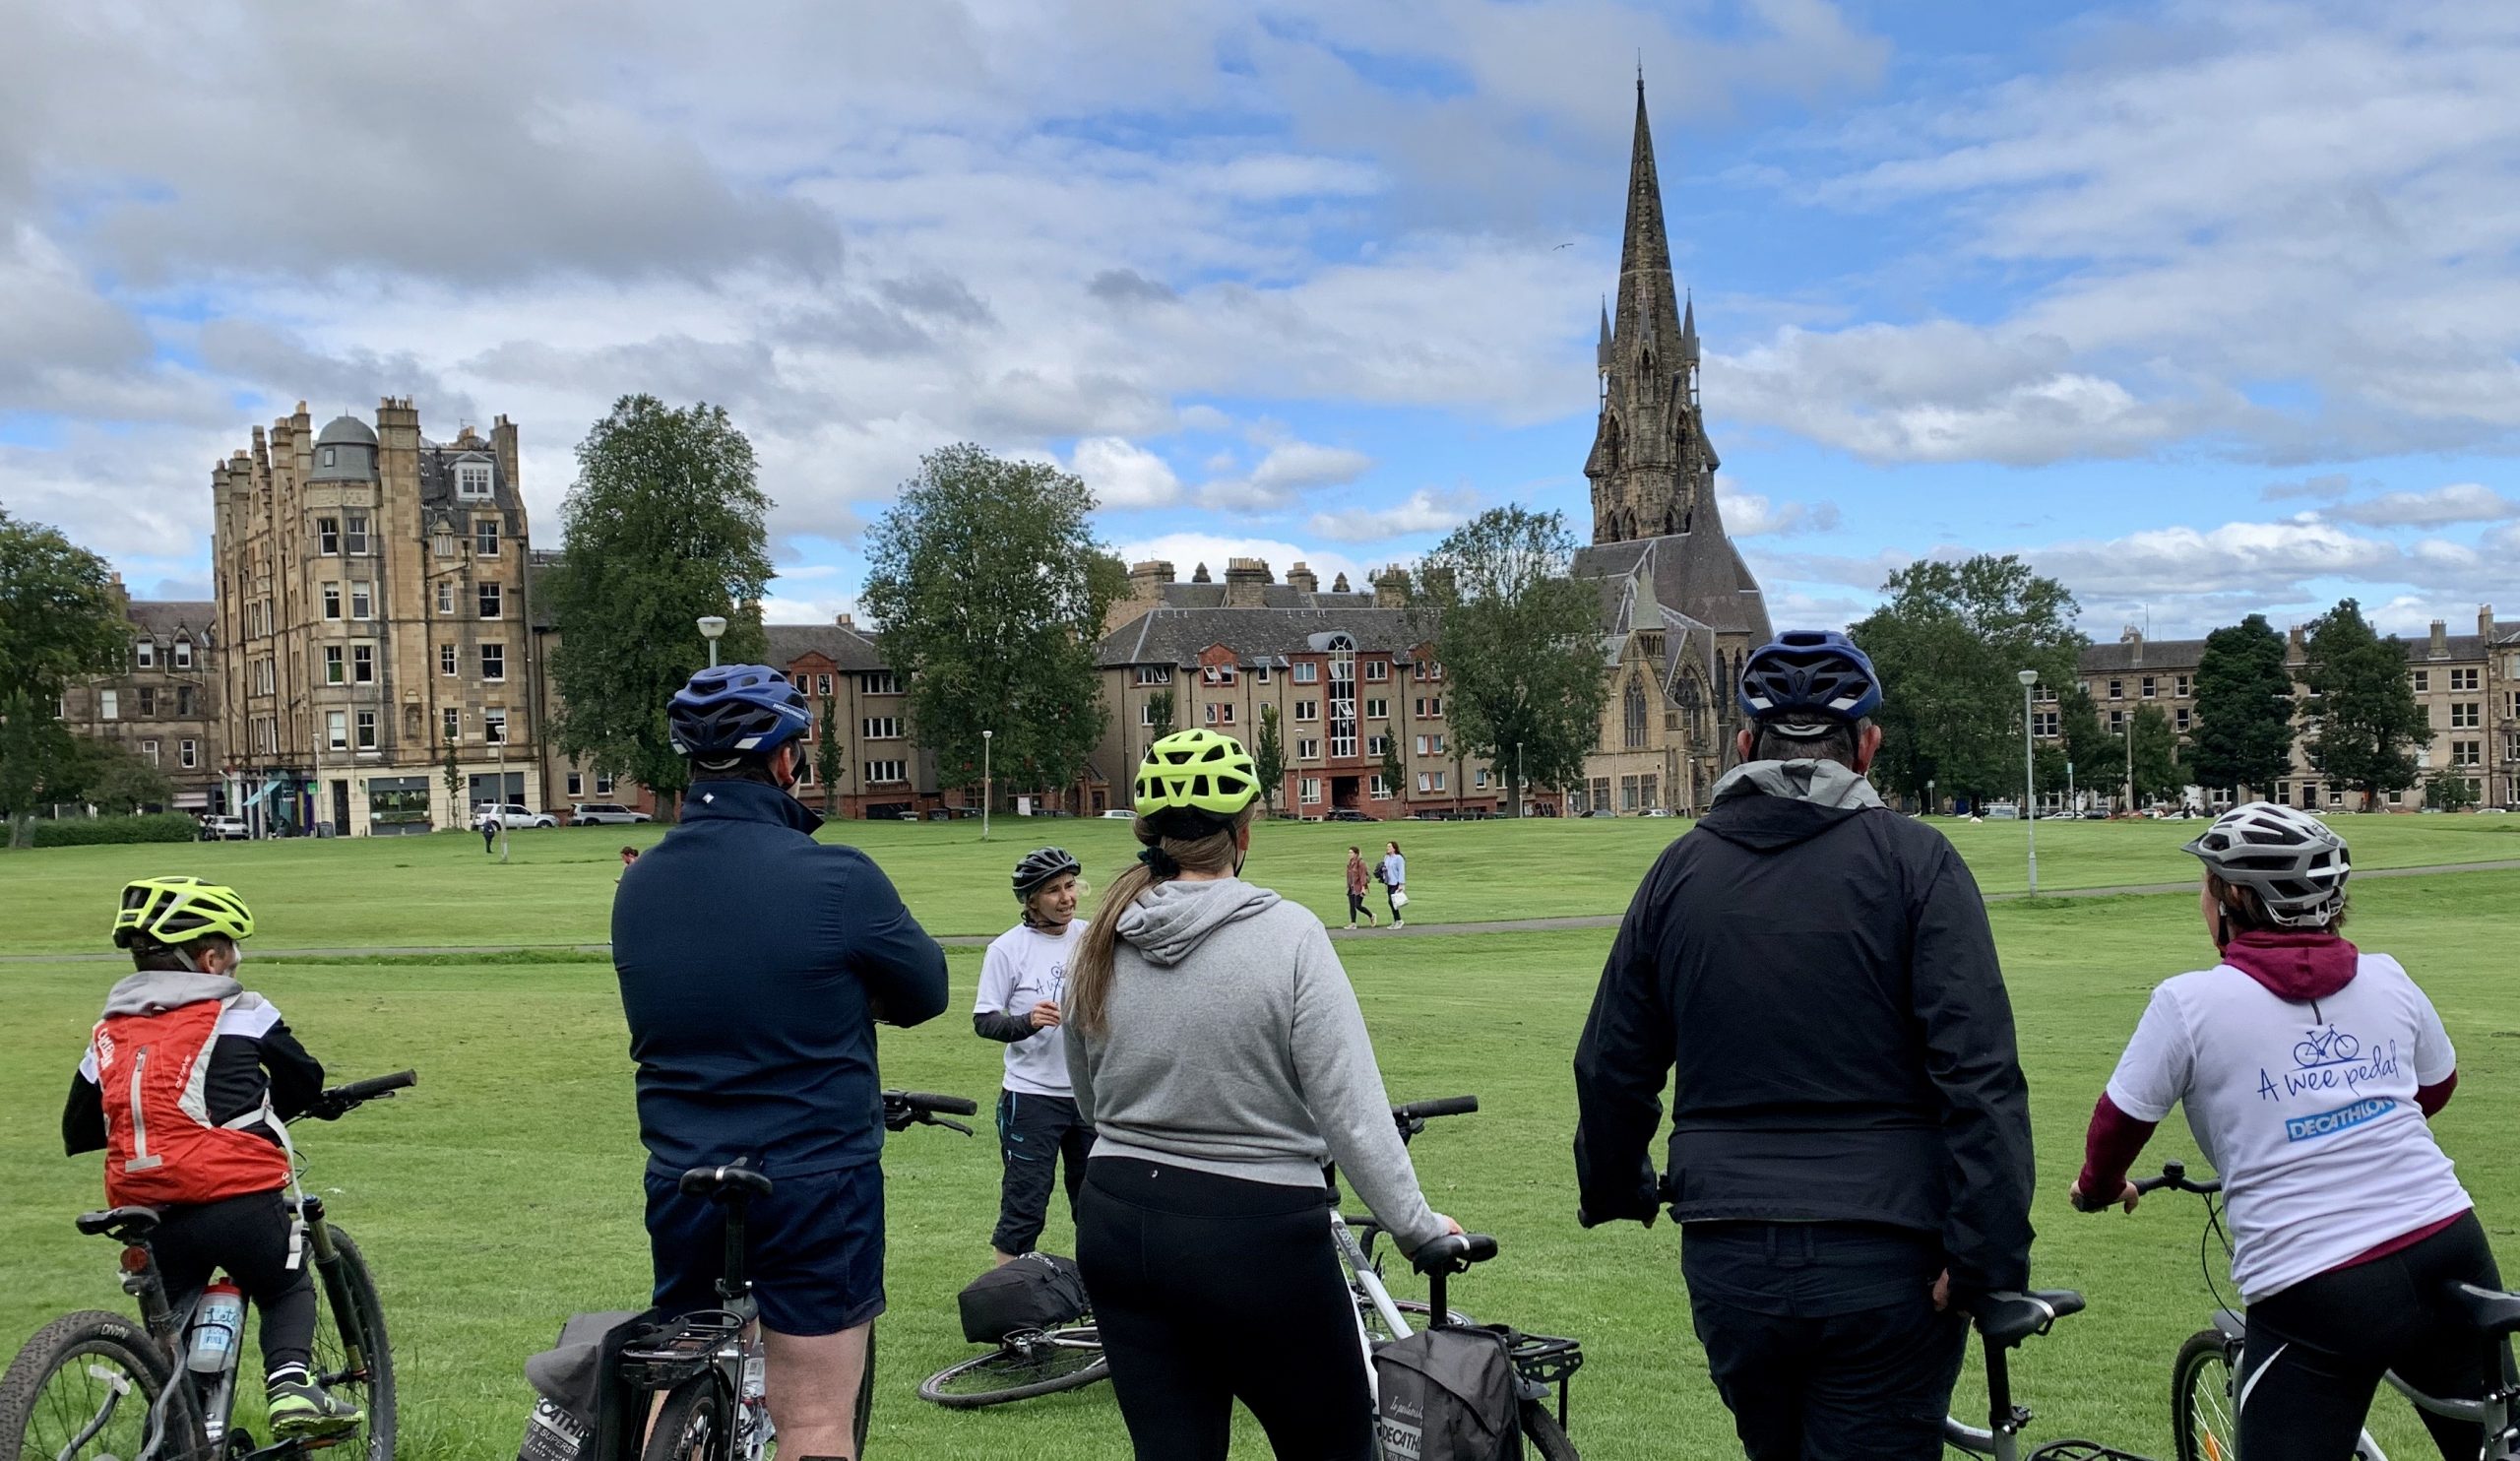 A wee pedal: Edinburgh Cycle Tours. The image show a group of people on a cycle tour, standing looking at Brunsfield Links